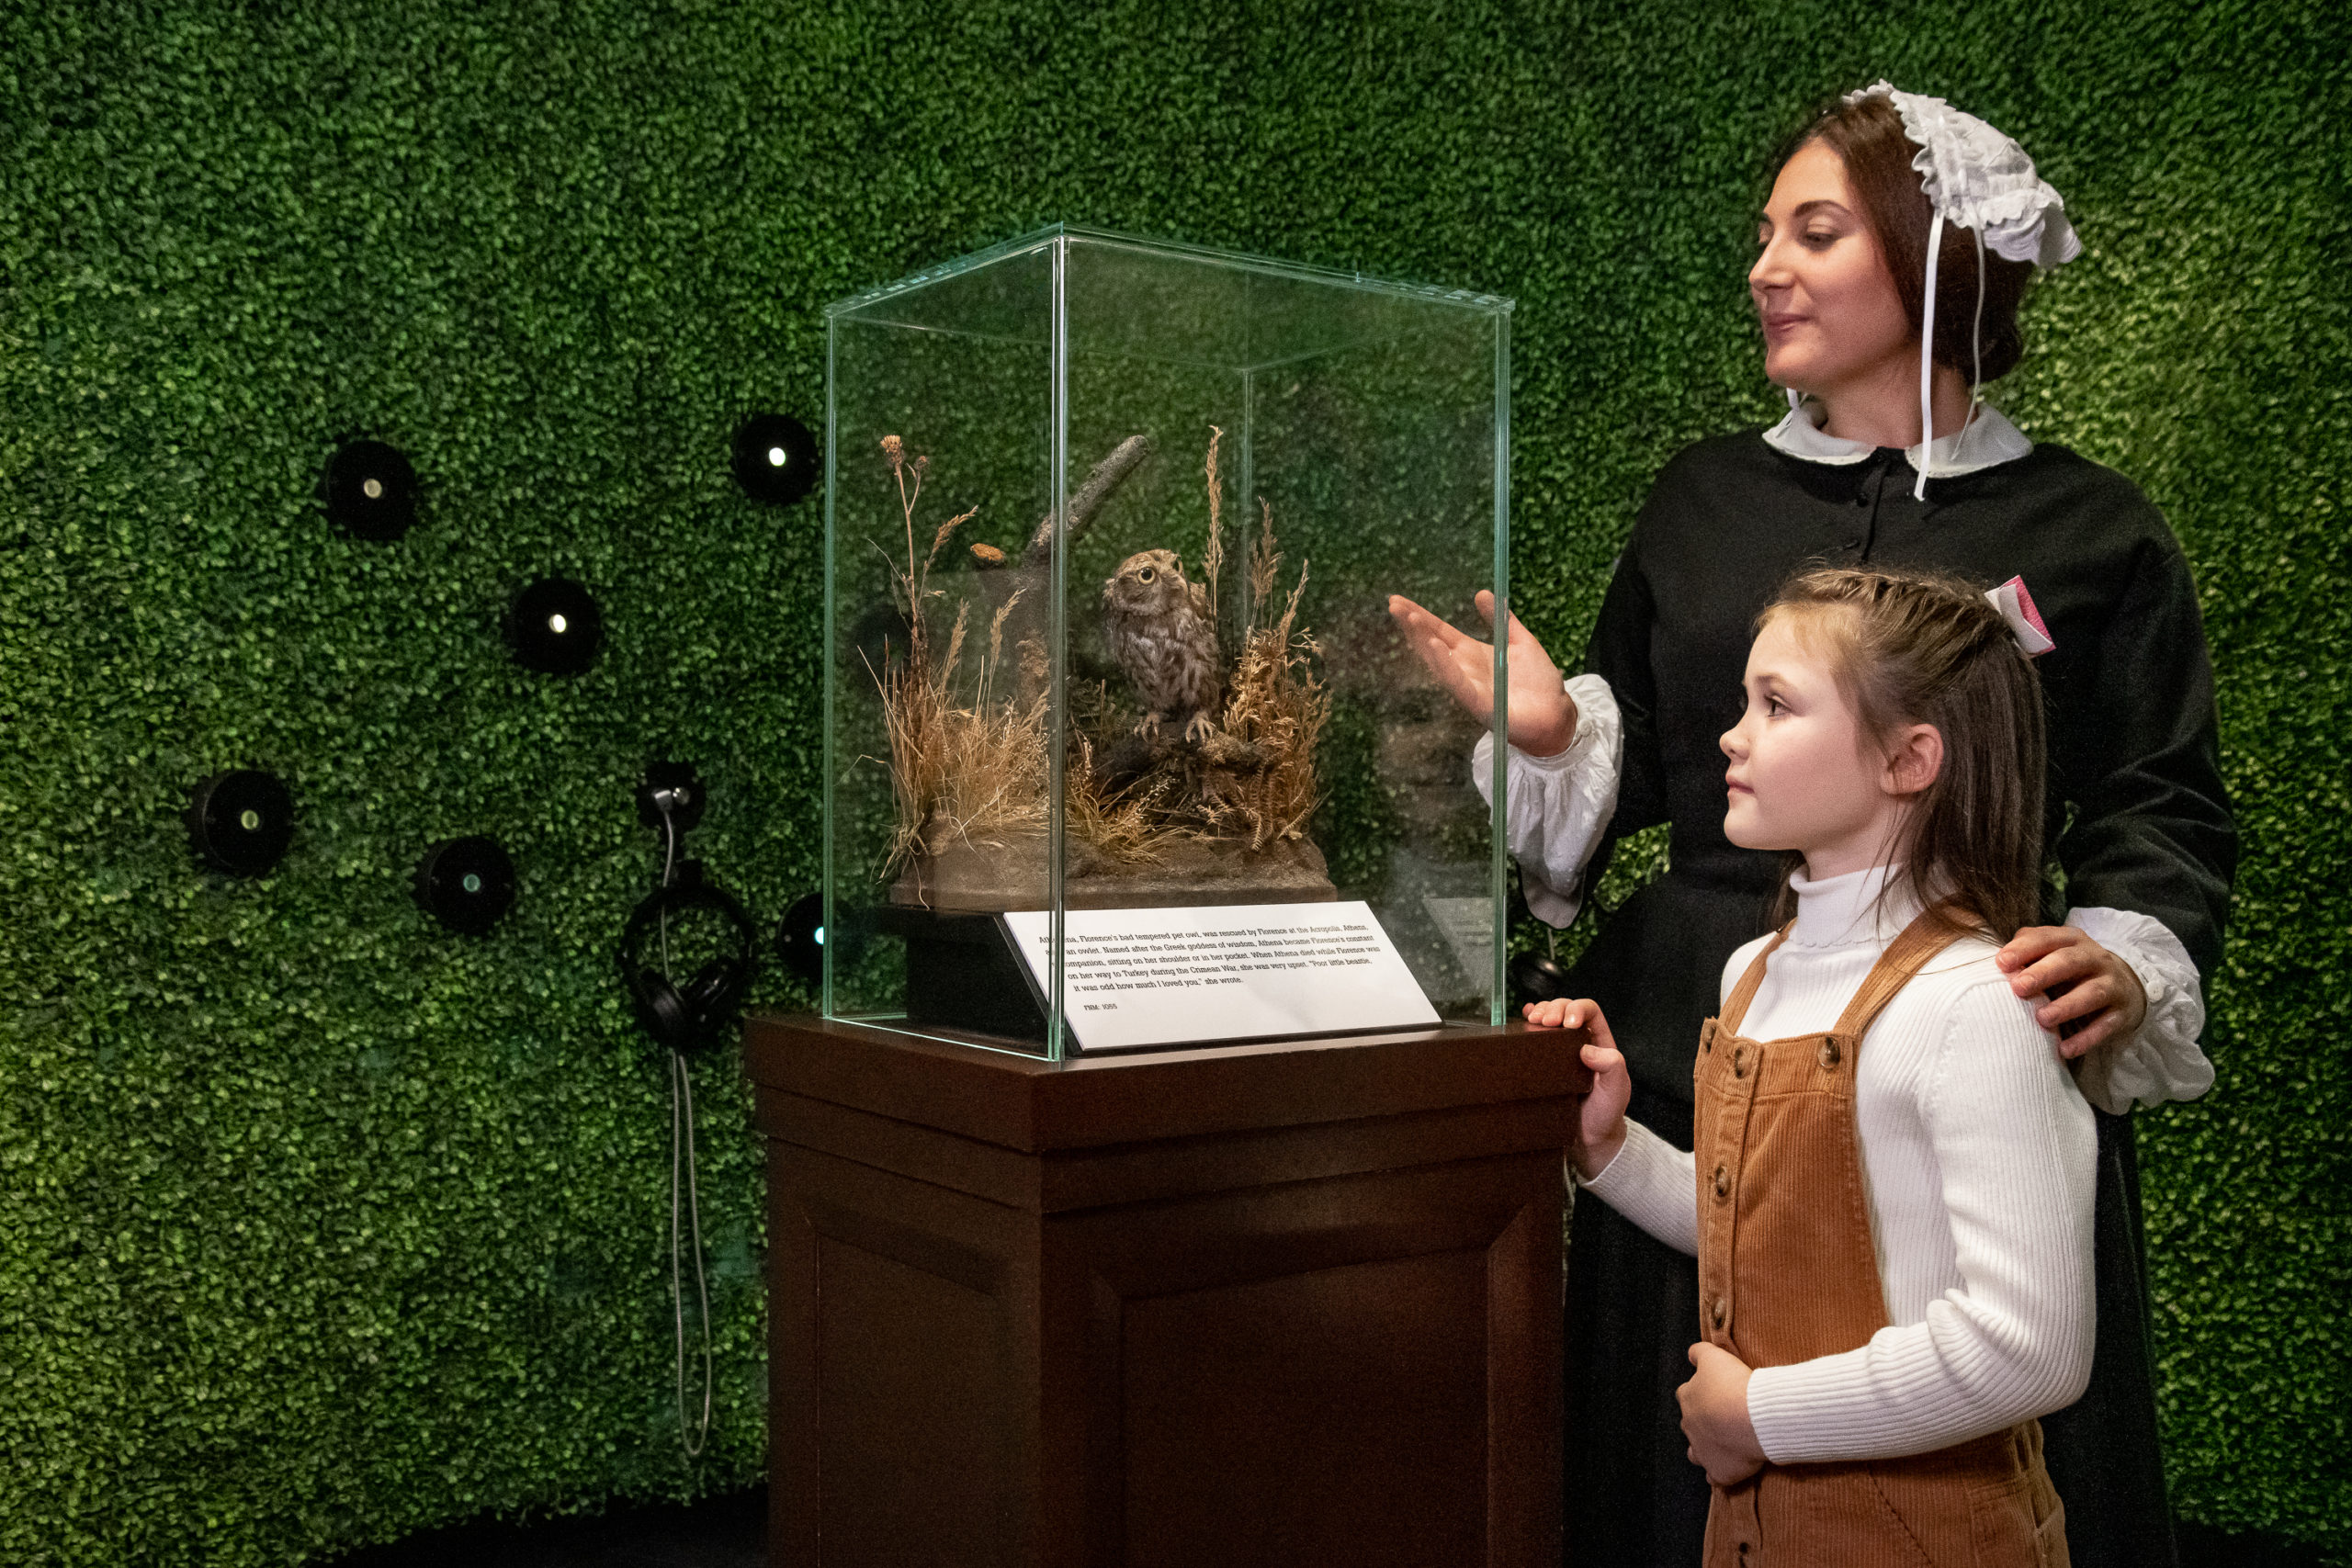 Florence Nightingale performer gestures towards a taxidermy owl in a glass case, standing next to a girl of about 10 years old